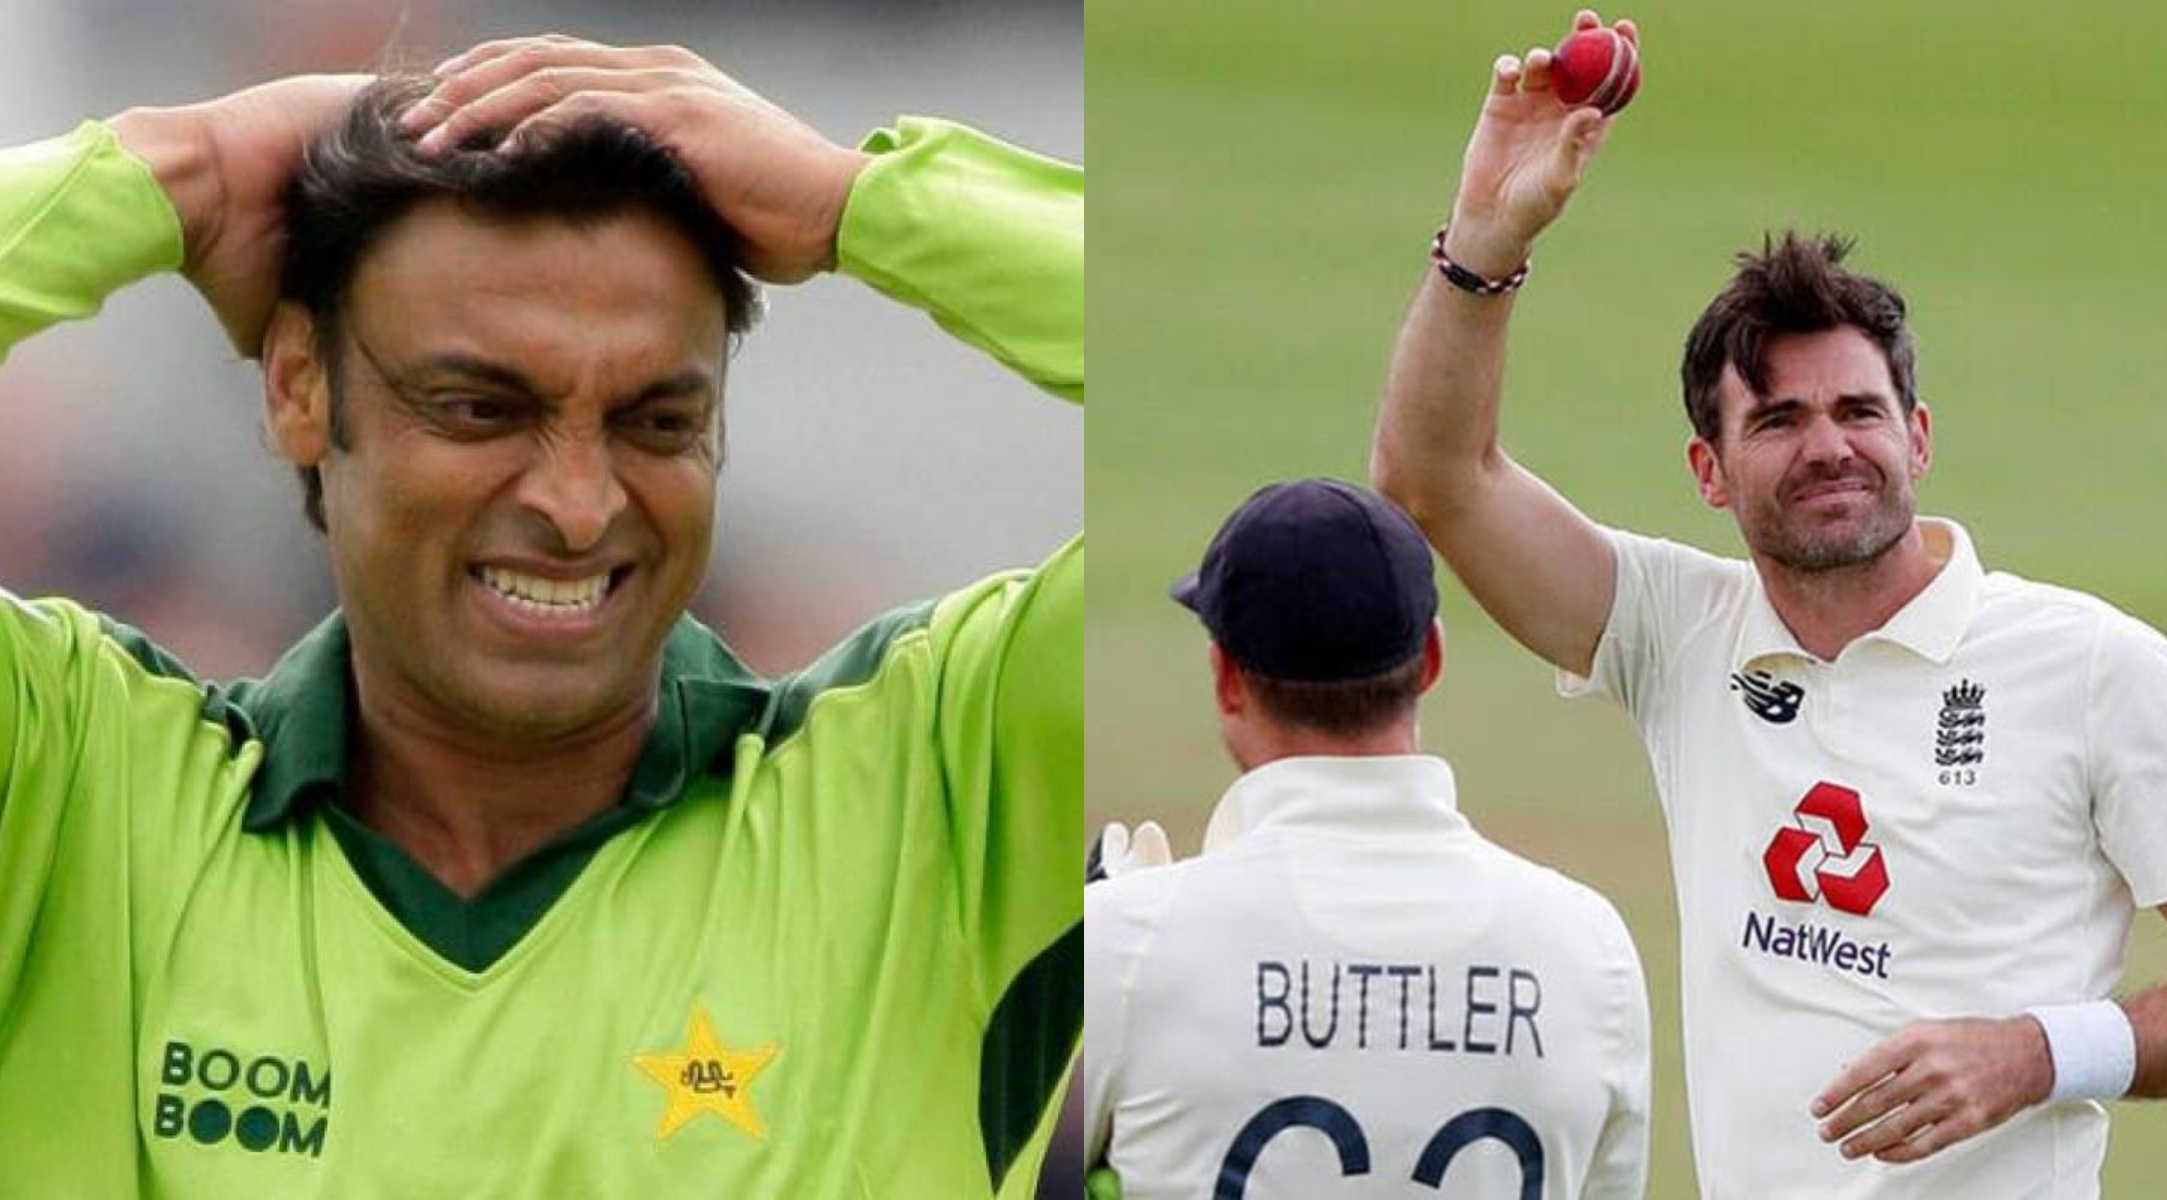 Akhtar wished James Anderson on reaching 600 Test wickets, but with a backhanded compliment